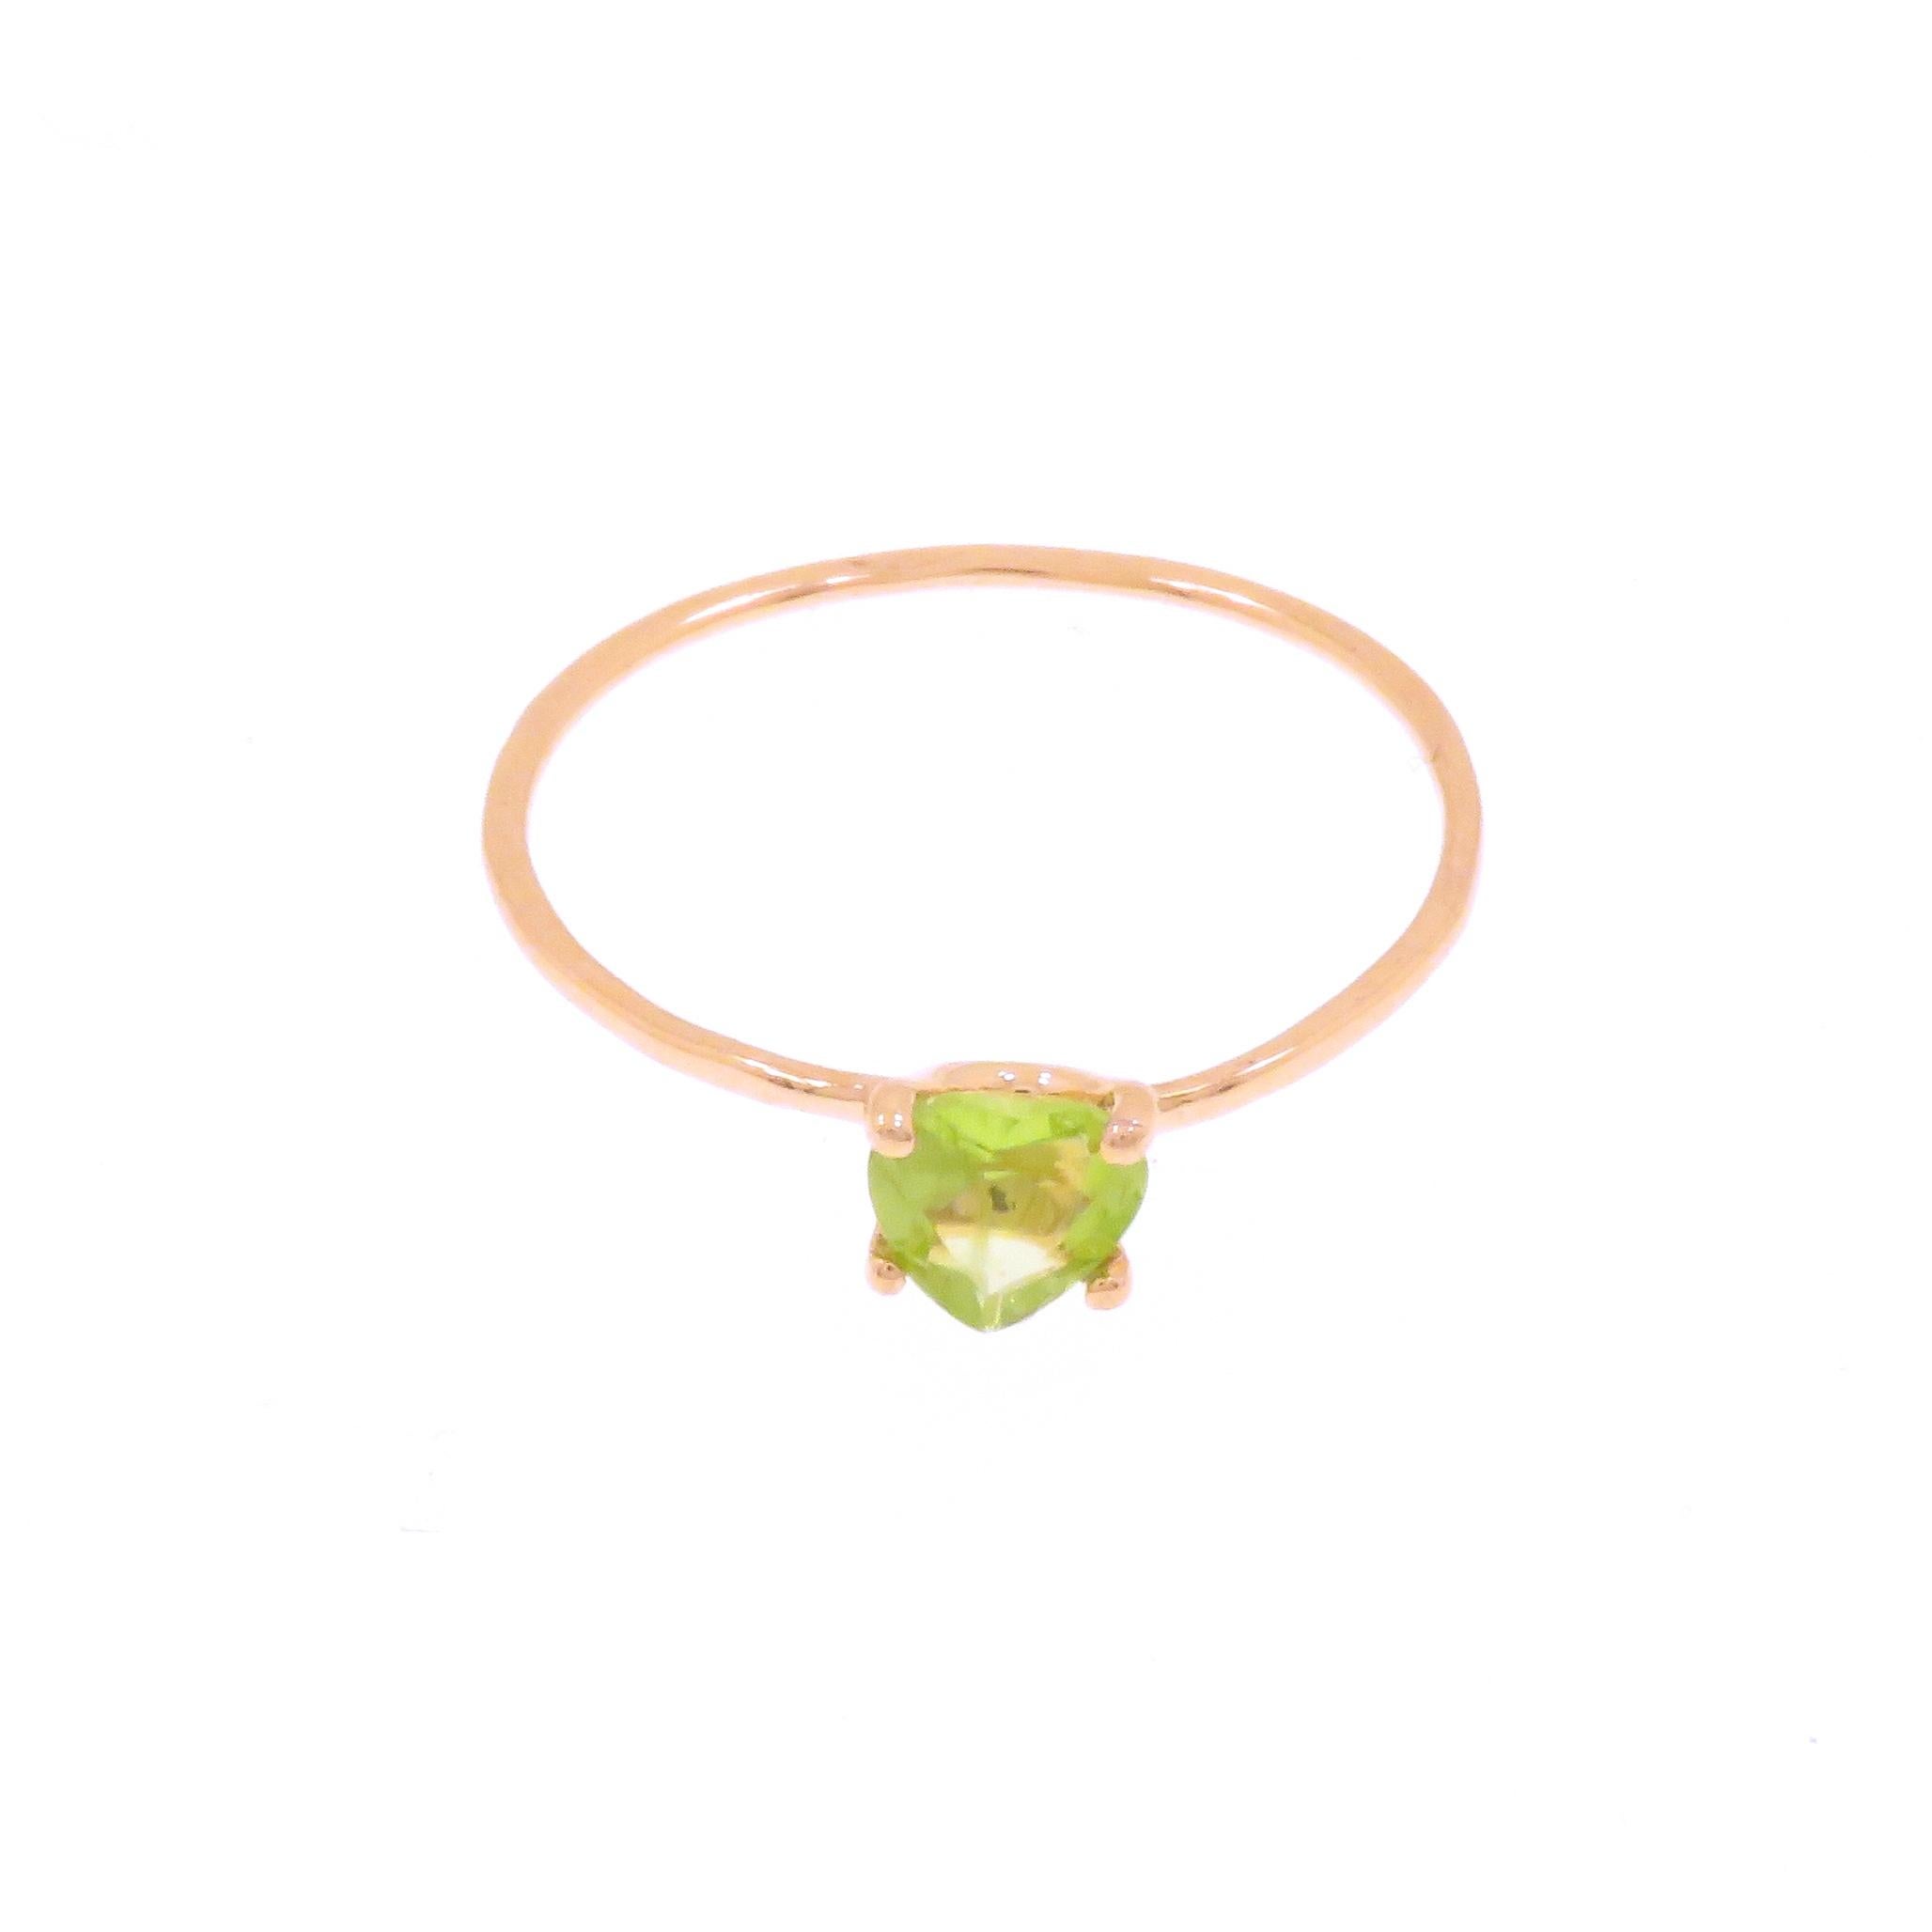 Stacking ring handmade in 9 carat rose gold with heart cut peridot, diameter 0.196 inches. 

Finger size: US size 6, Italian size 12, UK size M 1/2, French size 52. The ring can be re-sized to the customer's size before shipping. 
Total weight: 0.6